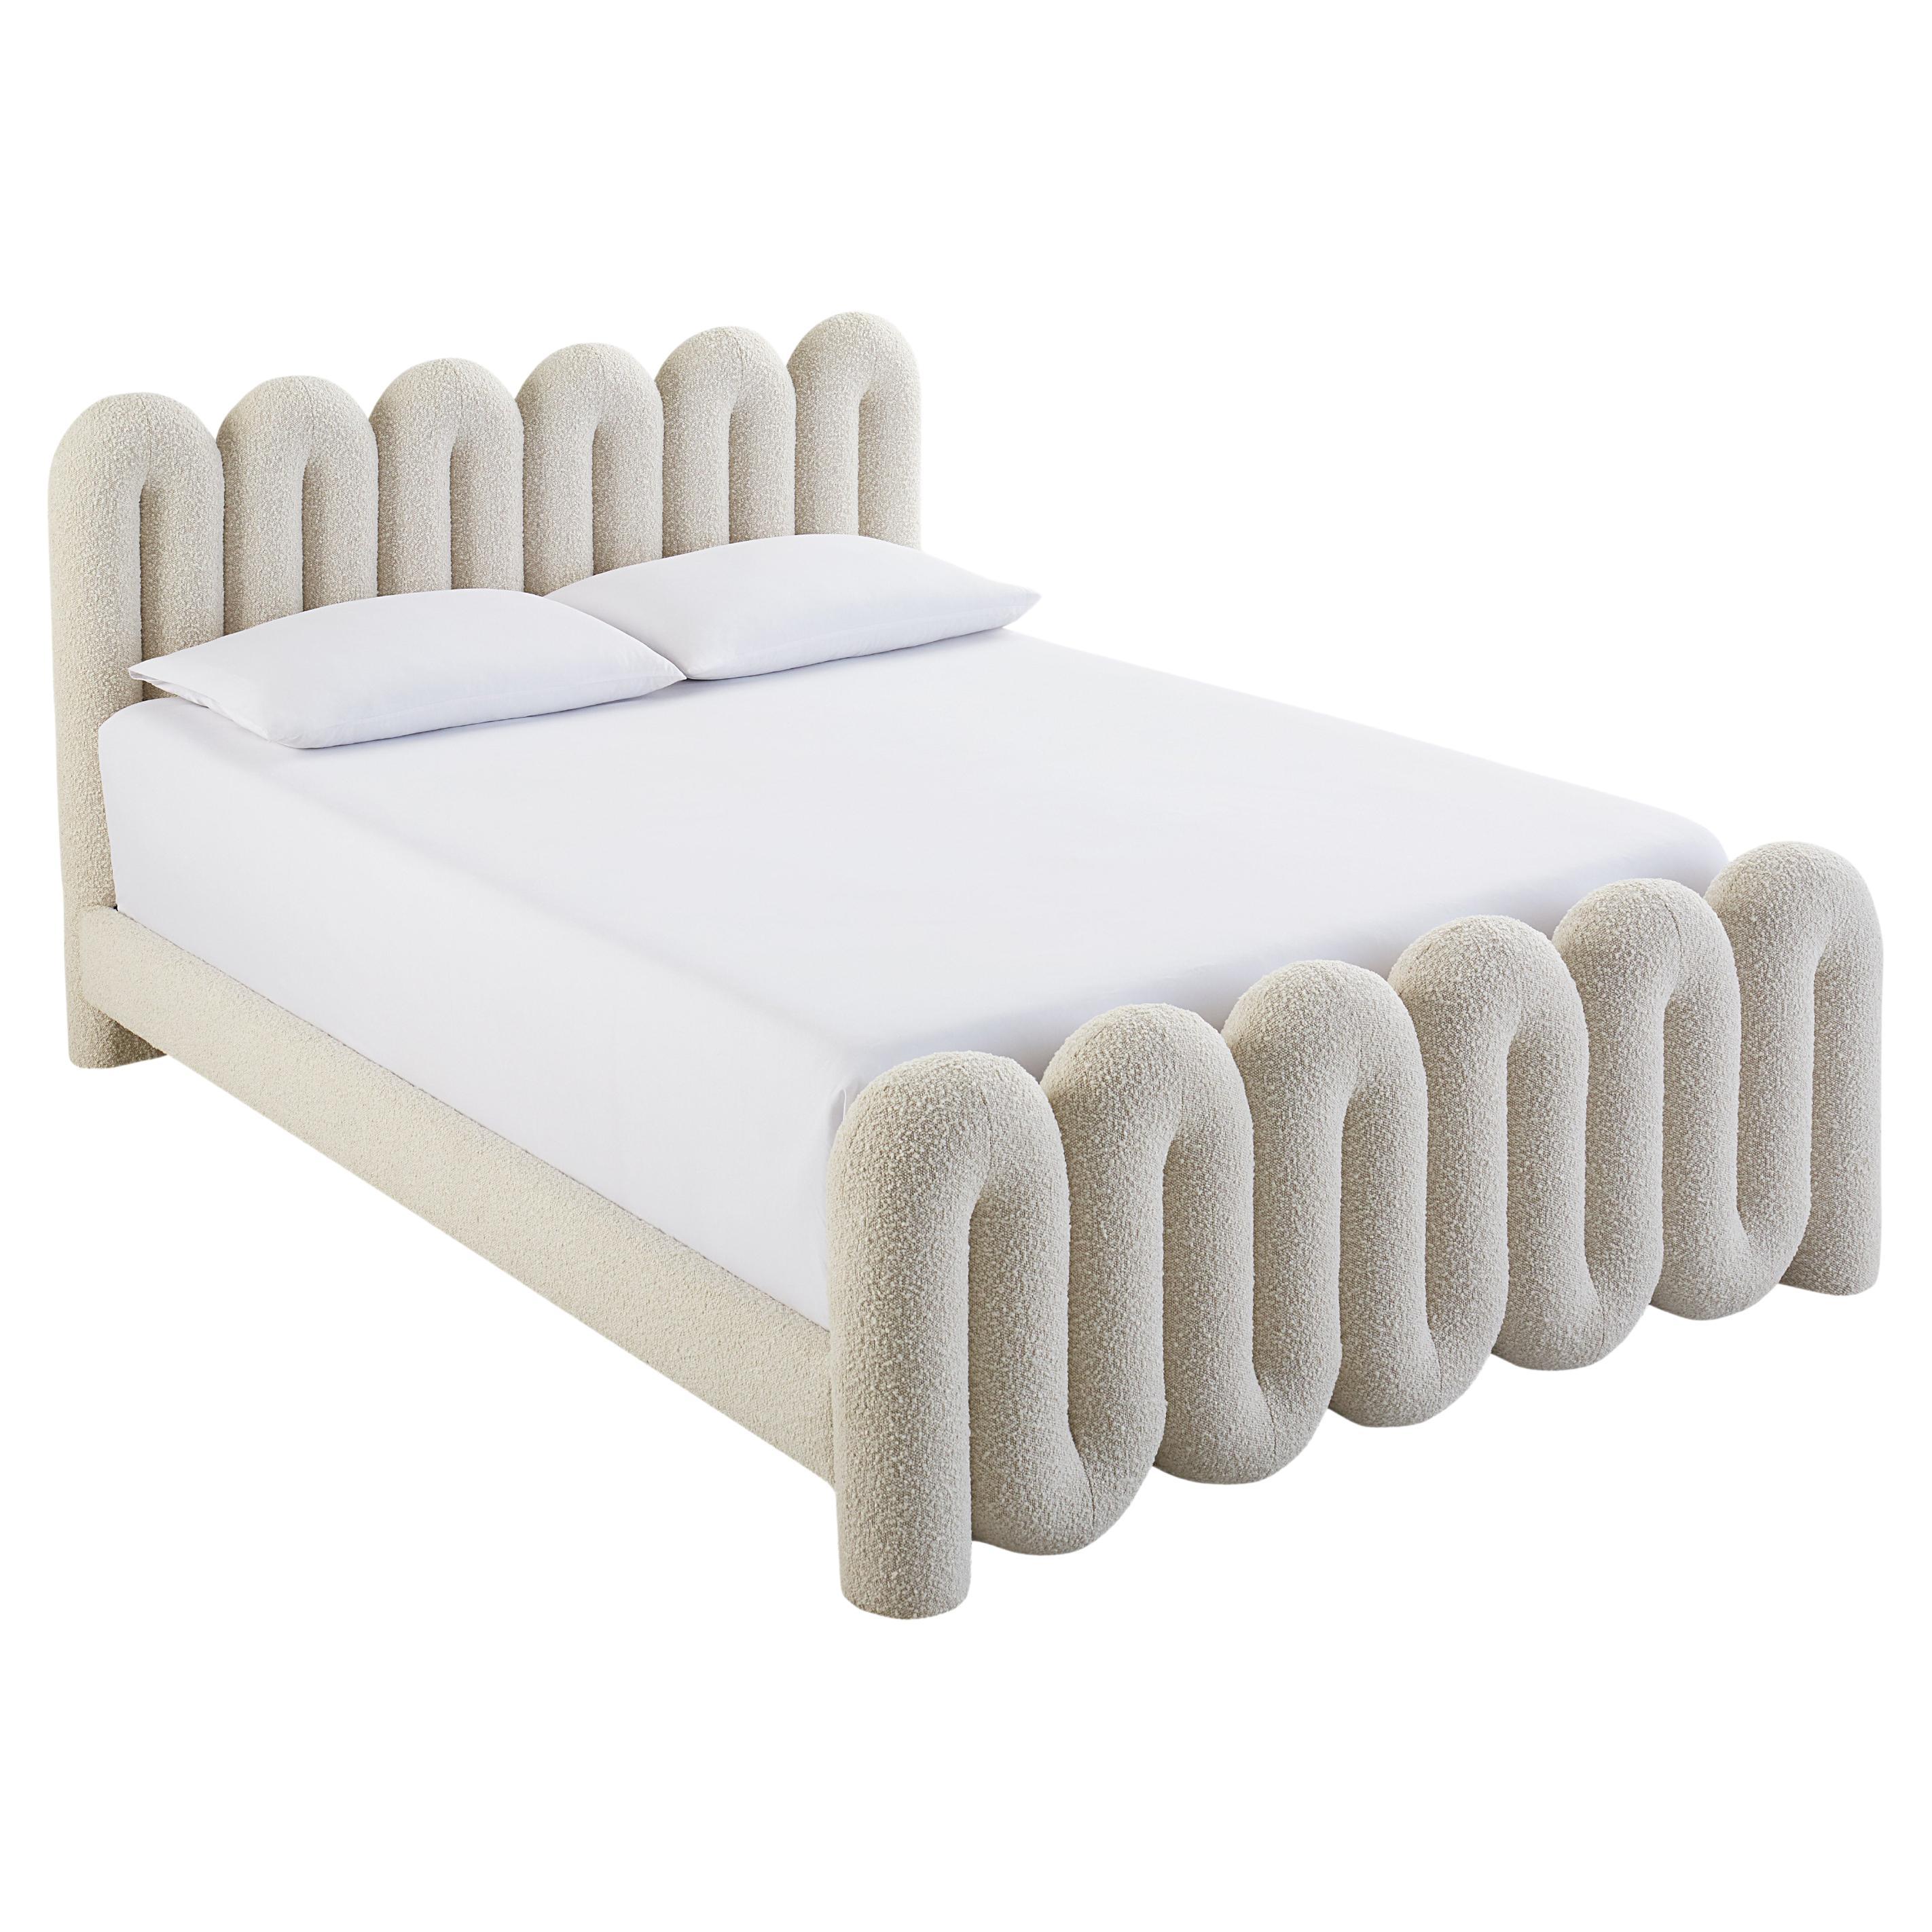 Serpentine Upholstered Queen Bed For Sale